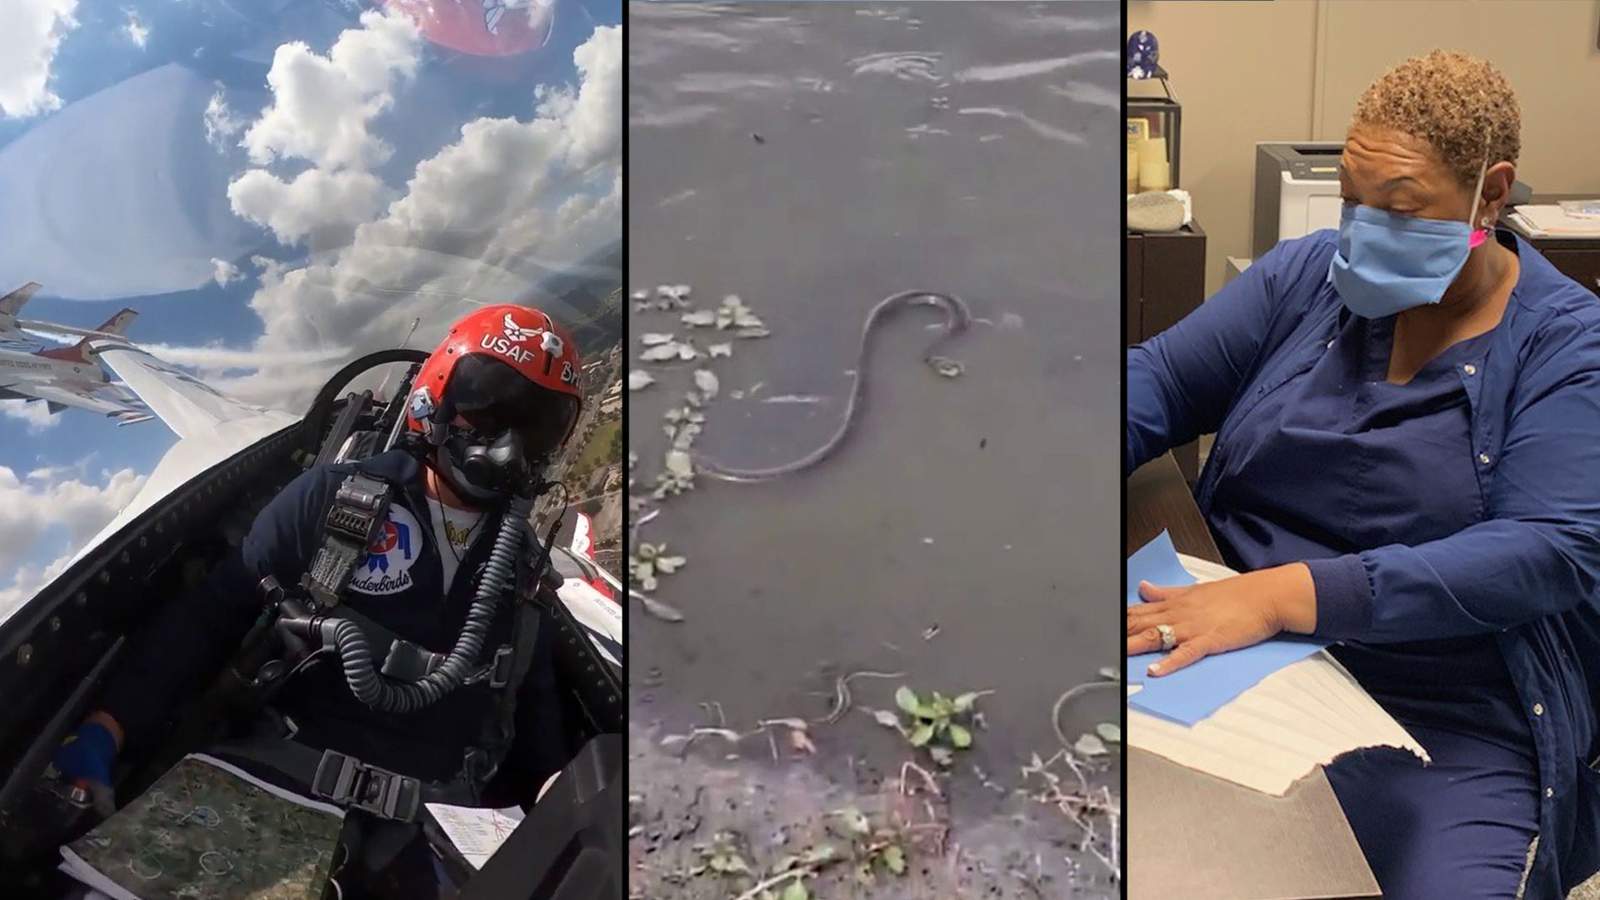 From Thunderbirds to snakes: KSAT.com’s 10 most-watched videos of 2020